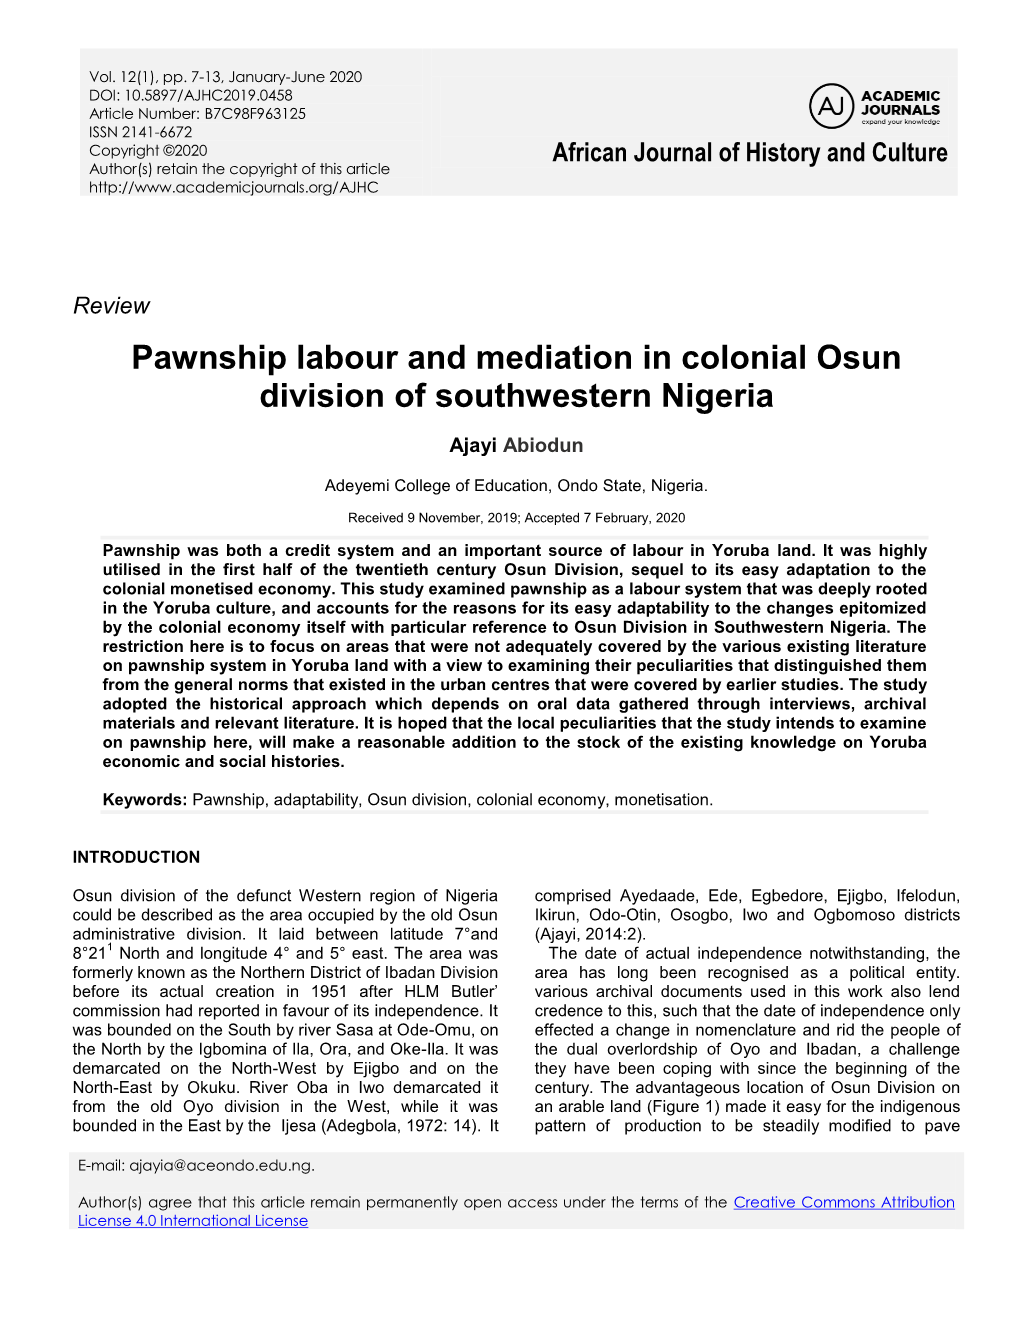 Pawnship Labour and Mediation in Colonial Osun Division of Southwestern Nigeria